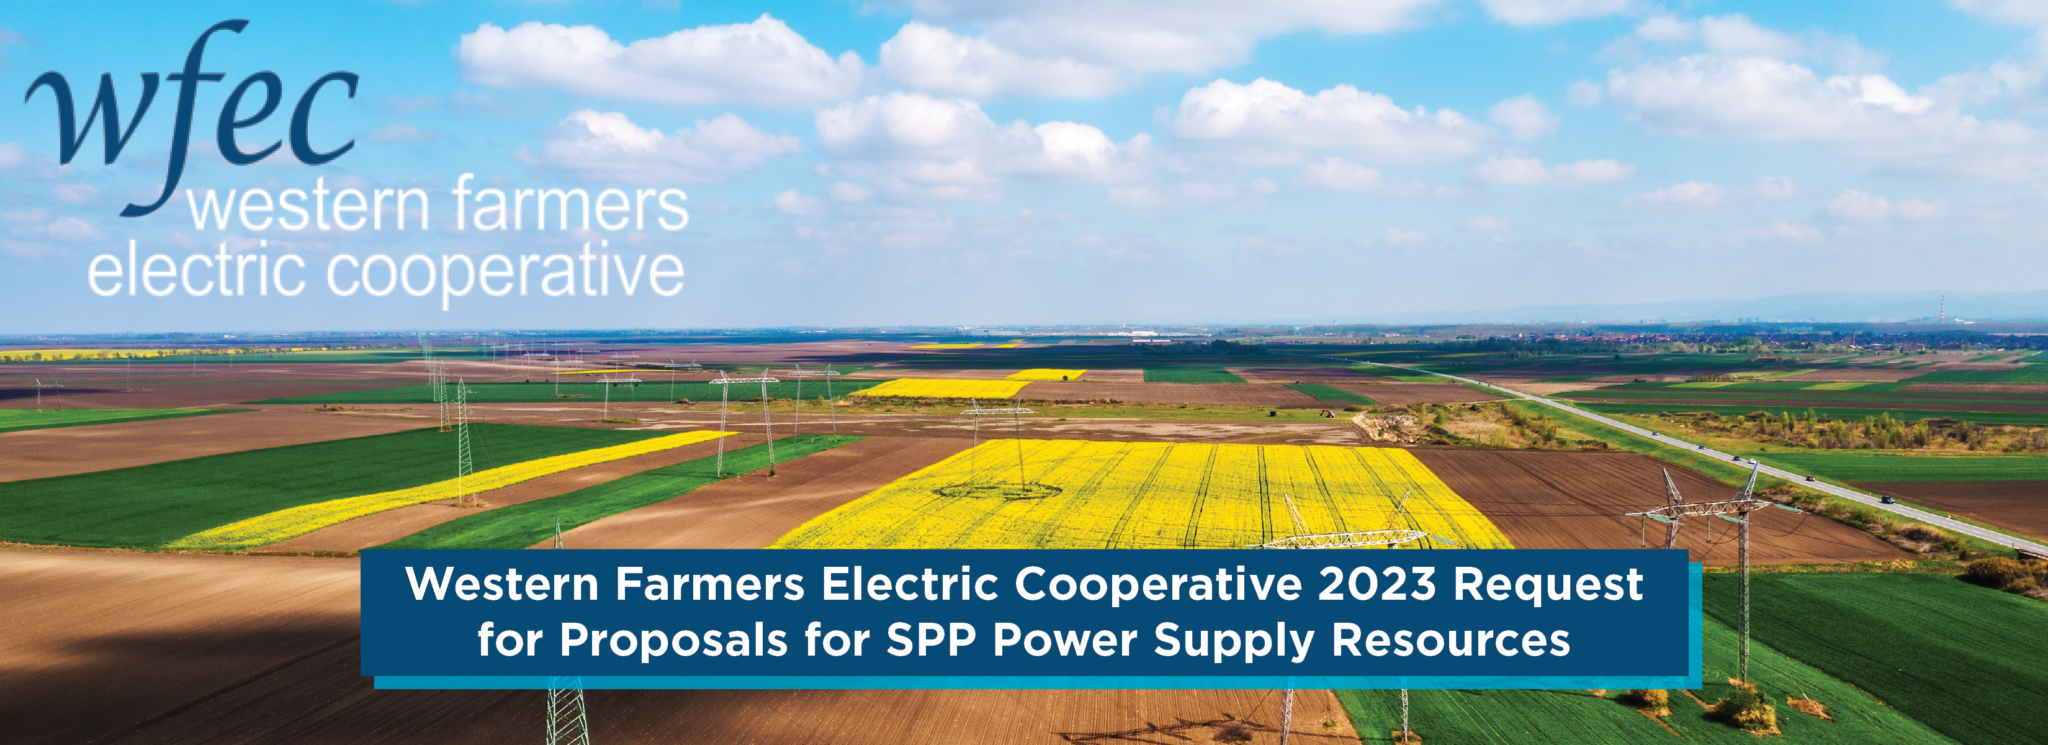 Western Farmers Electric Cooperative 2023 RFP for SPP Power Supply